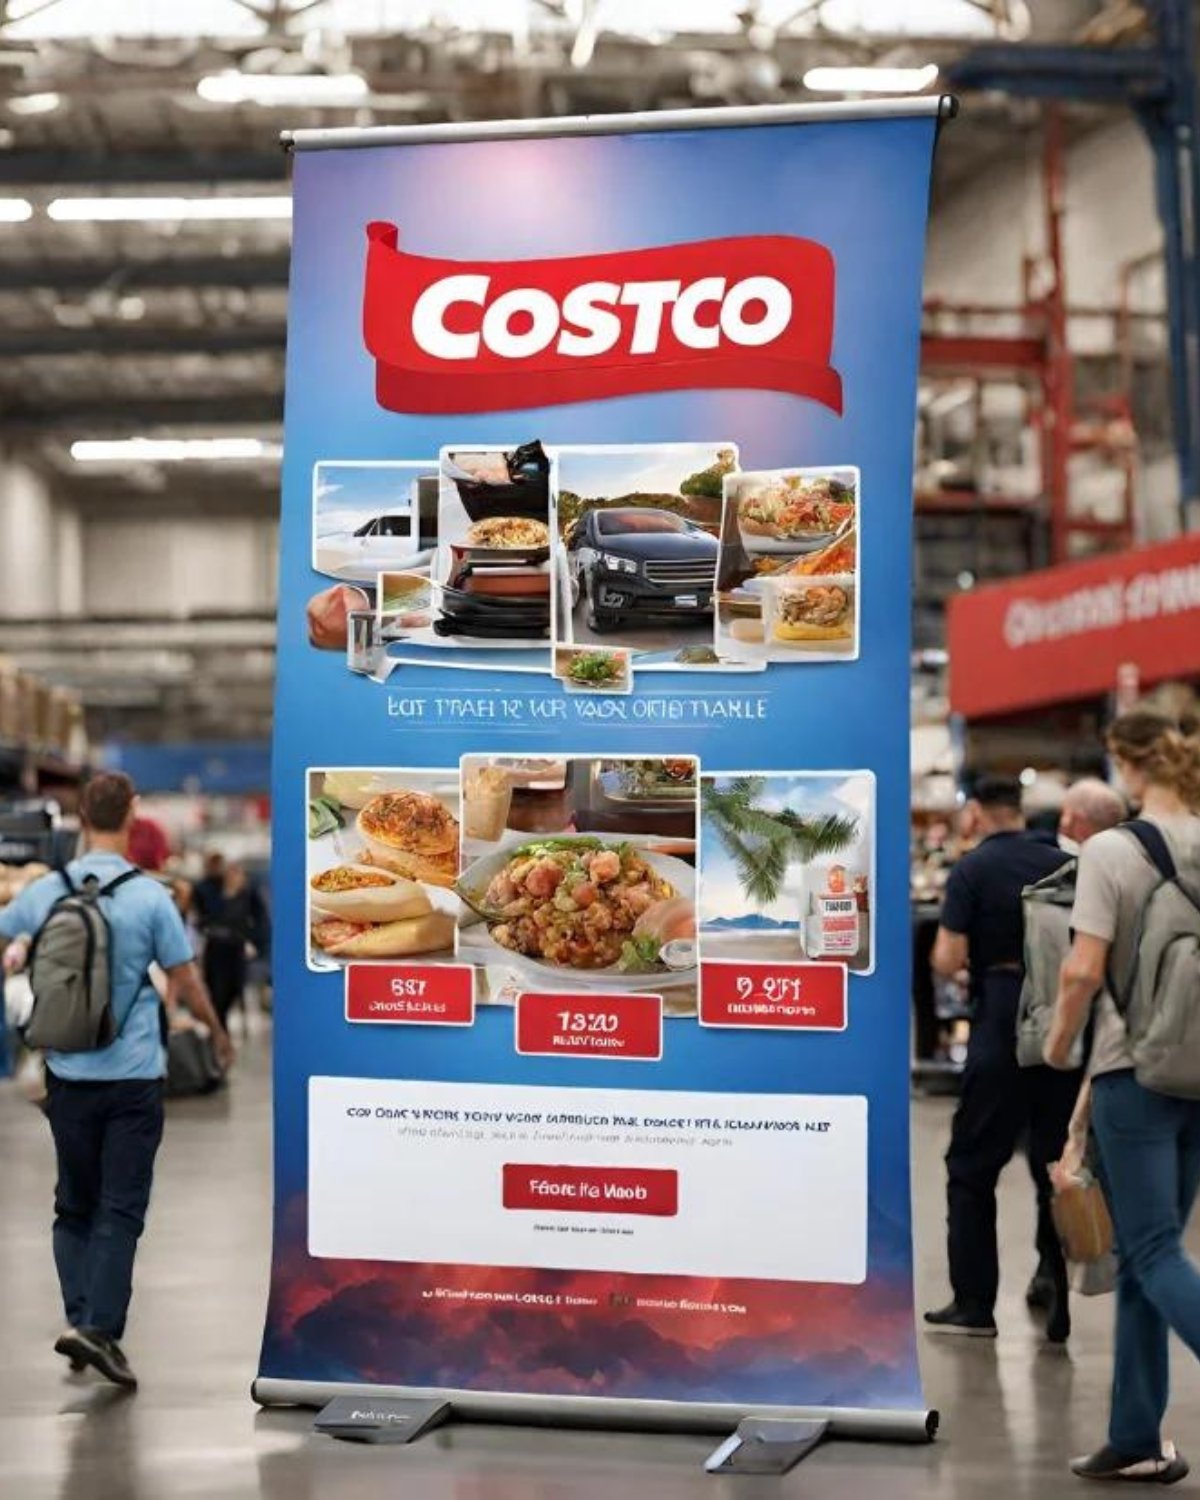 9 Little-Known Facts About Costco's Travel Offerings